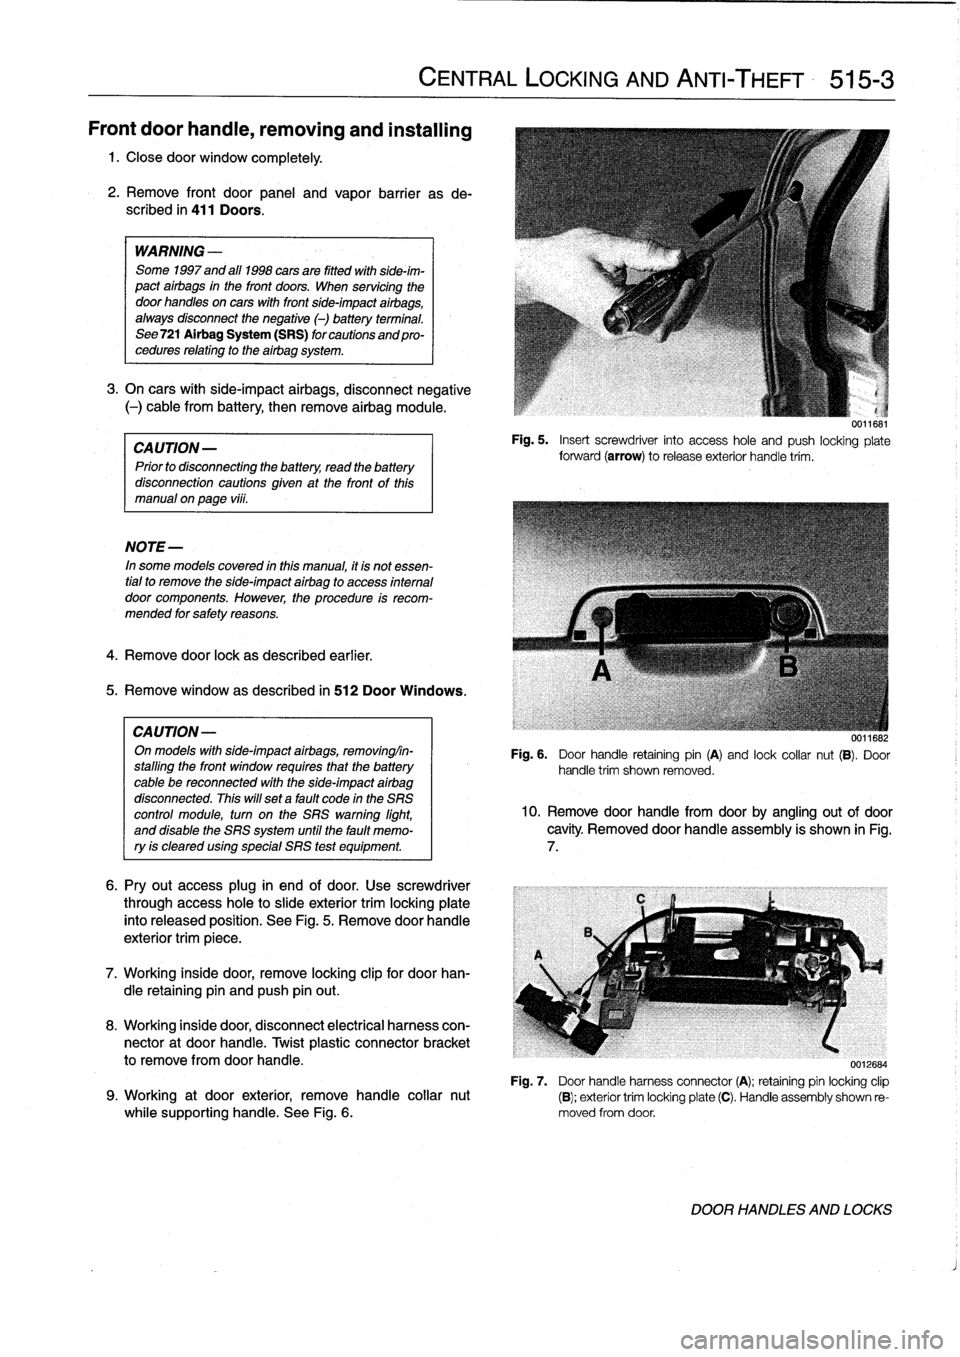 BMW 318i 1995 E36 Workshop Manual 
Front
door
handle,
removing
and
installing

1
.
Closedoor
window
completely
.

2
.
Remove
front
door
panel
and
vapor
barrier
asde-
scribed
in
411
Doors
.

WARNING
-

Some
1997
and
al]
1998
cars
are
f